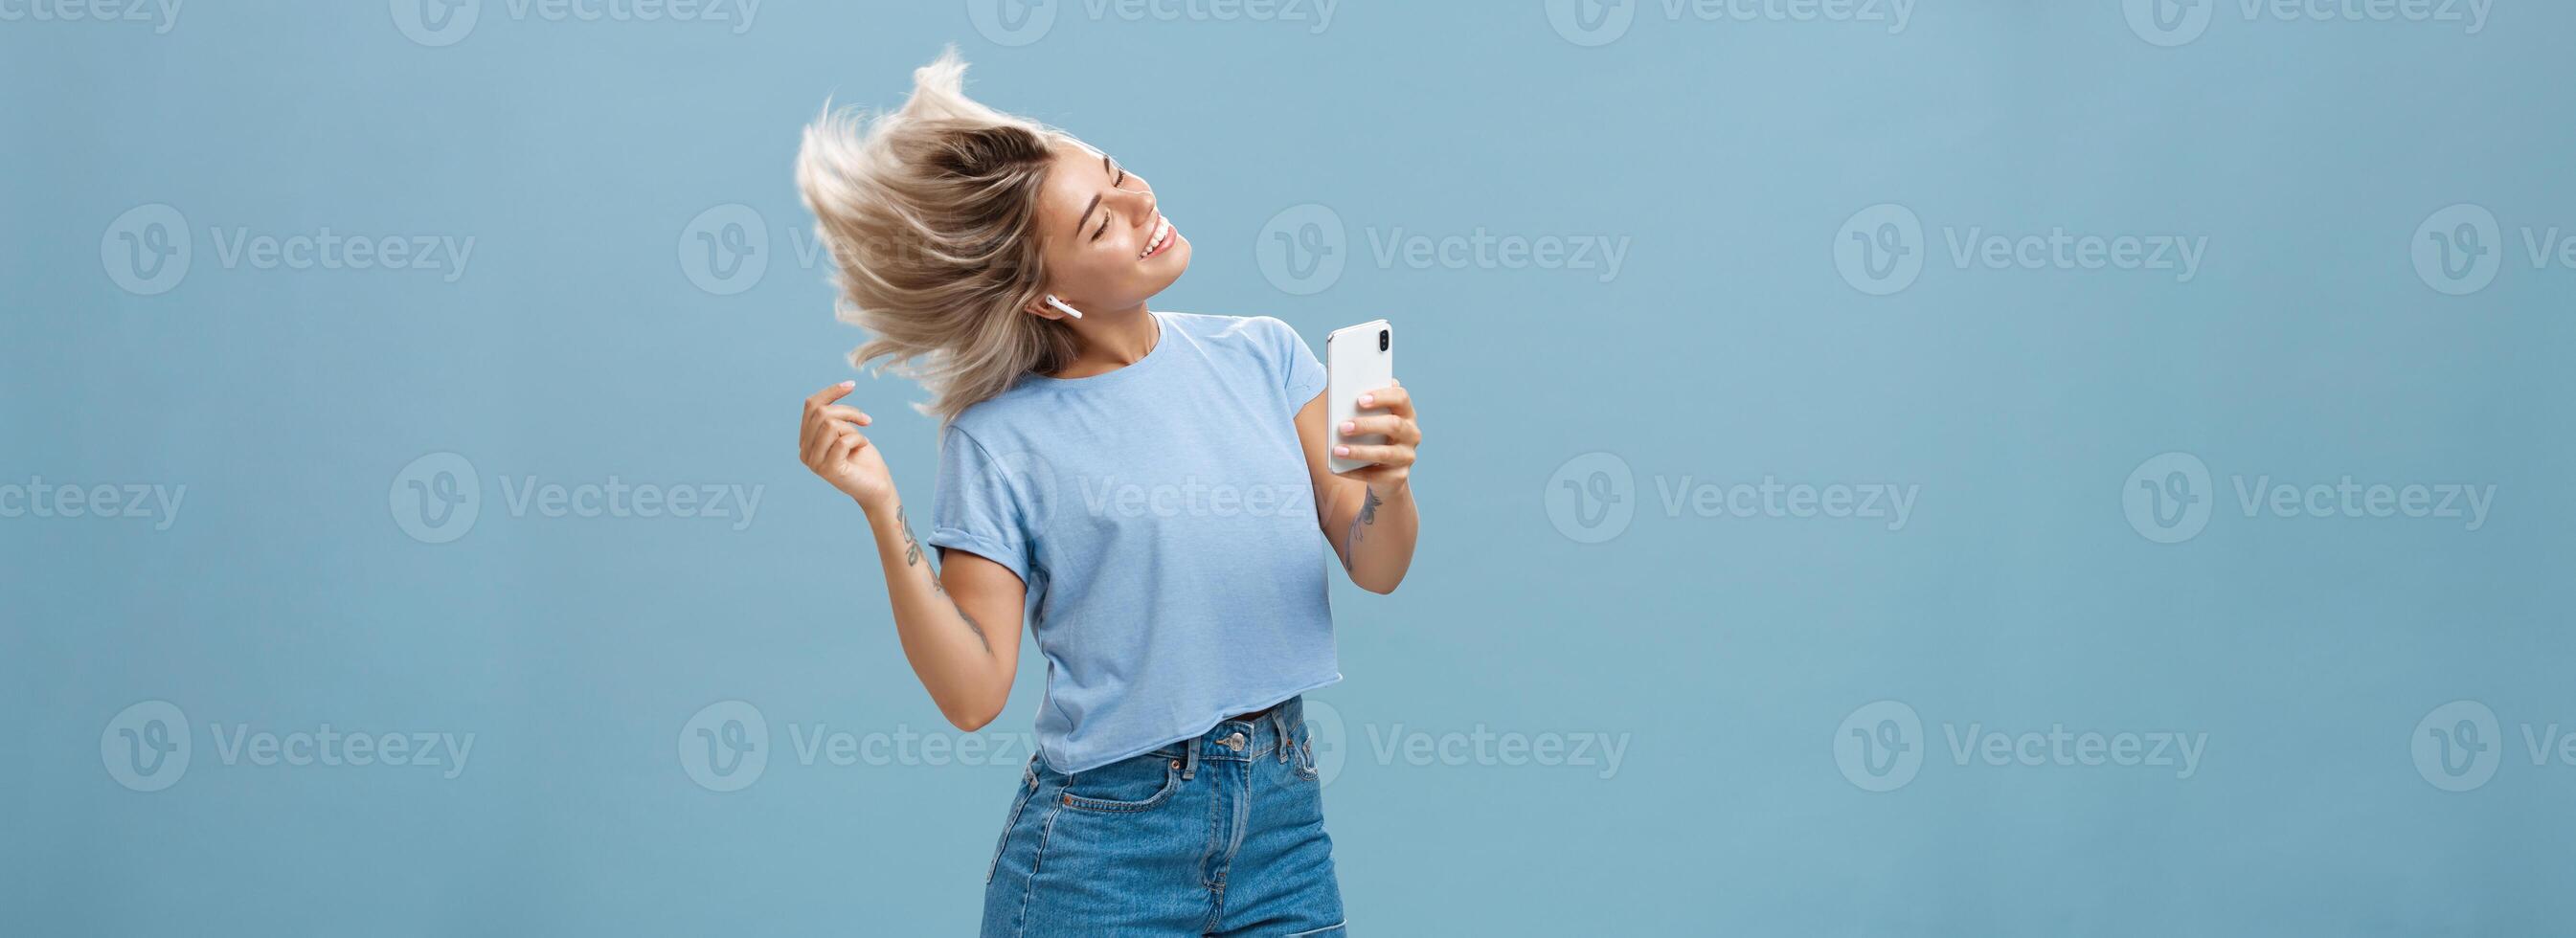 Girl enjoying cool bits in brand new wireless earphones advertising earbuds in own blog recodring video via smartphone dancing from joy and delight smiling listening music over blue background photo